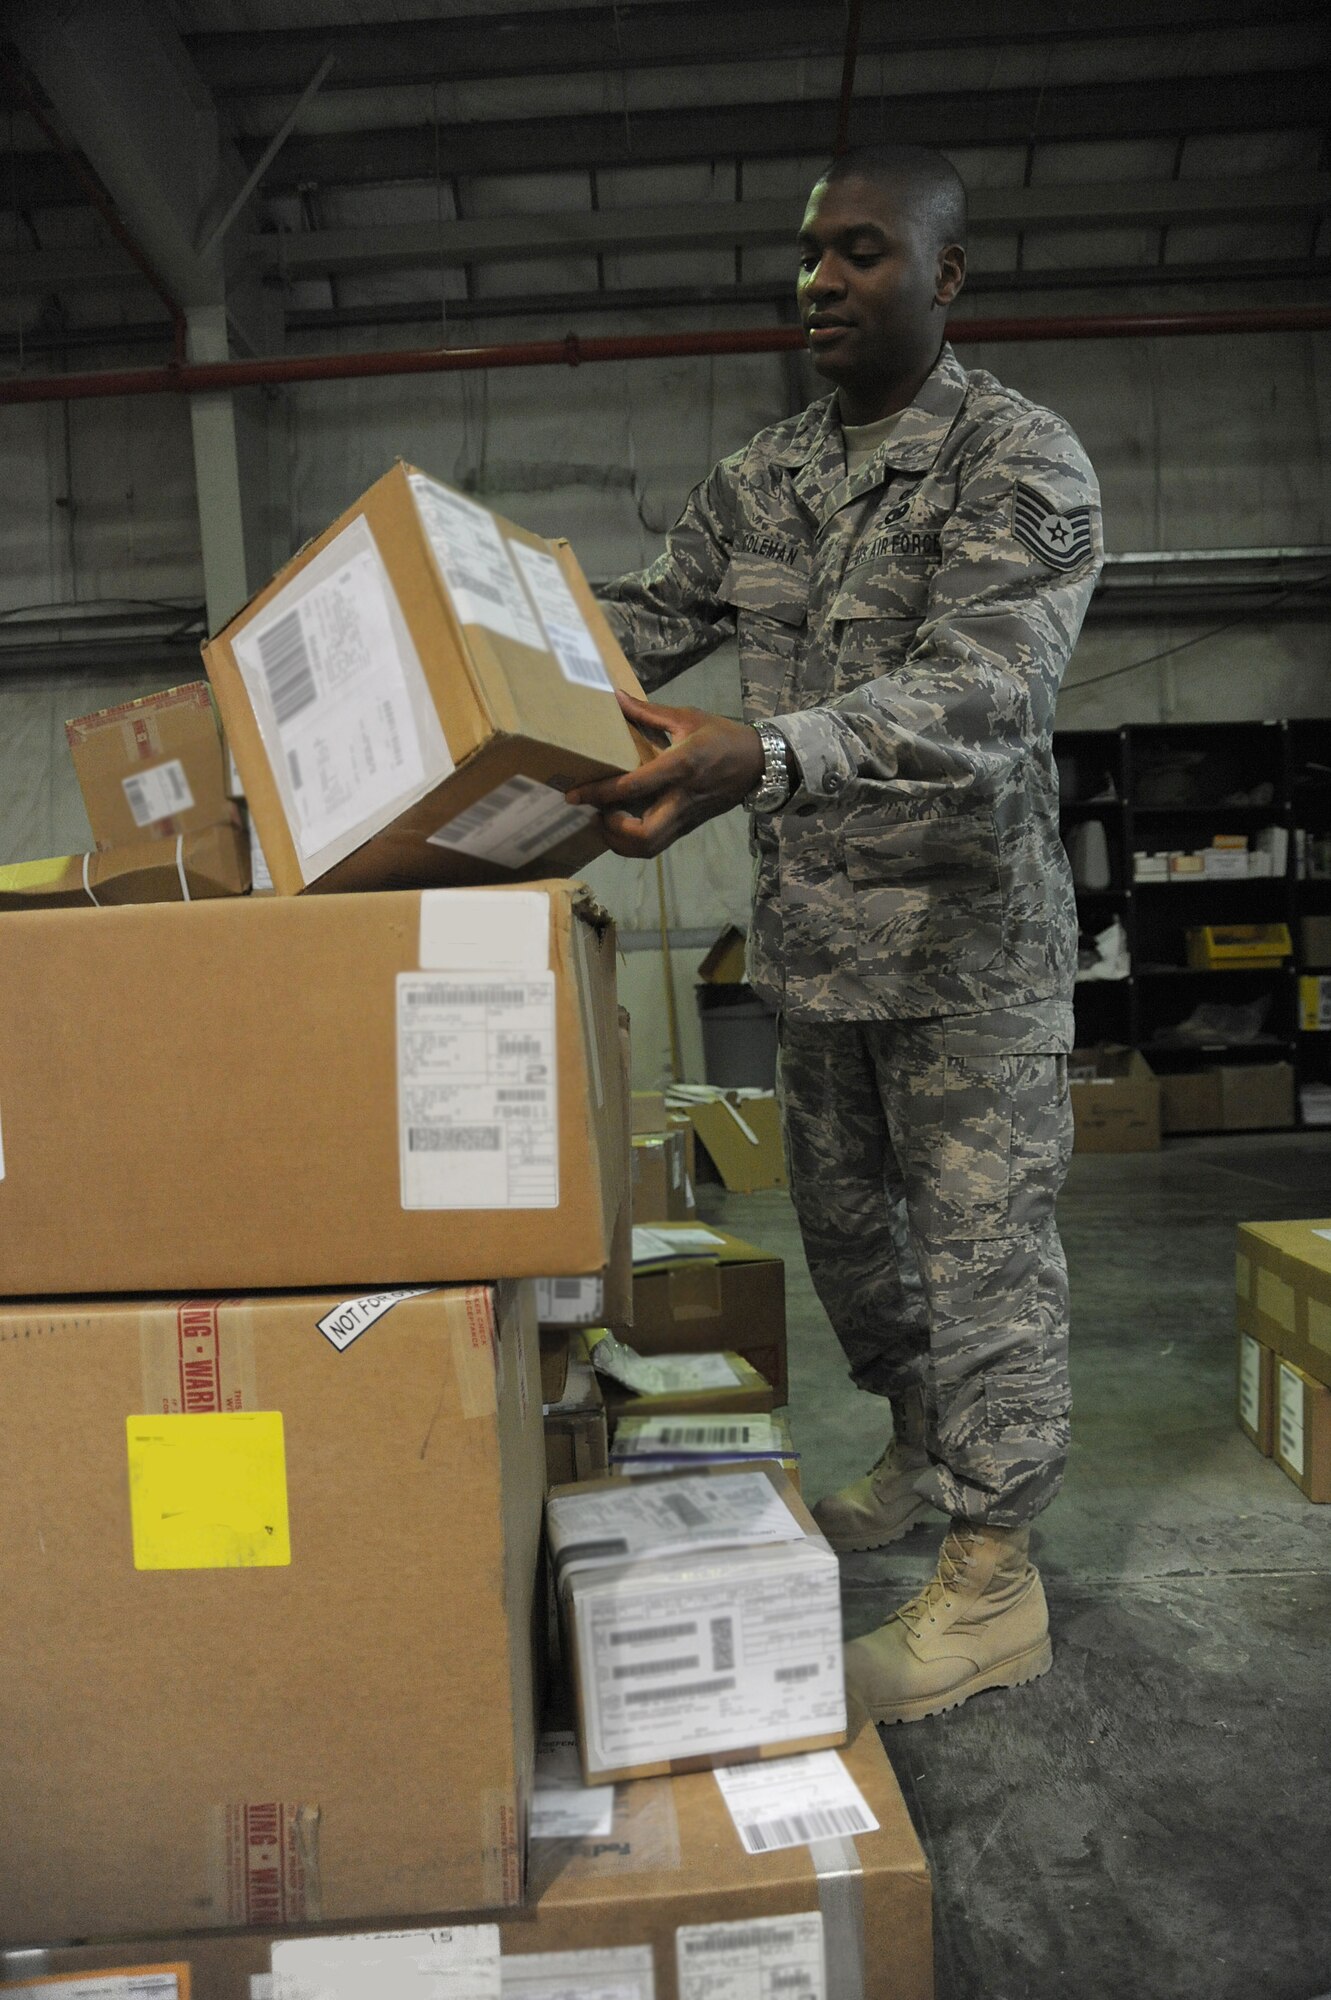 Tech Sgt. Jeremie Coleman, 380th Logistics Readiness Squadron, inspects boxes during the in-checking process at the receiving dock, April 24 at an undisclosed location in Southwest Asia. The receiving section verifies stock numbers and accounts for each item, matching it against the packing slip to ensure all items have arrived. Sergeant Coleman is deployed from the Air National Guard Combat Readiness Training Center, Gulfport, Miss. and hails from Meridian, Miss. (U.S. Air Force photo by Senior Airman Brian J. Ellis) (Released)